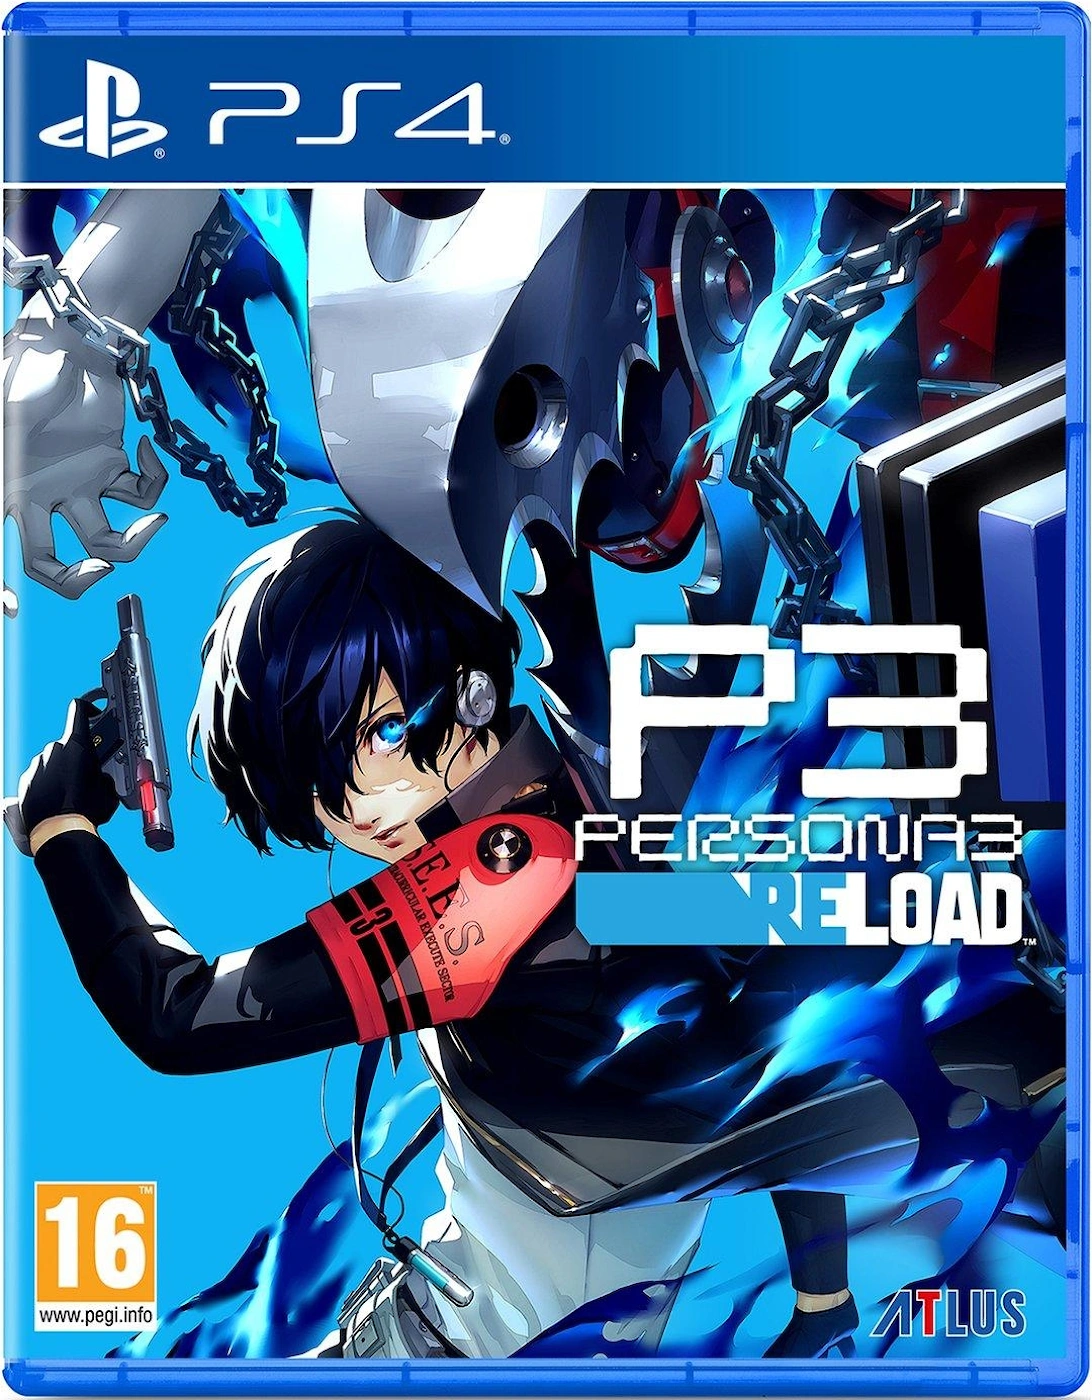 Persona 3 Reload, 2 of 1